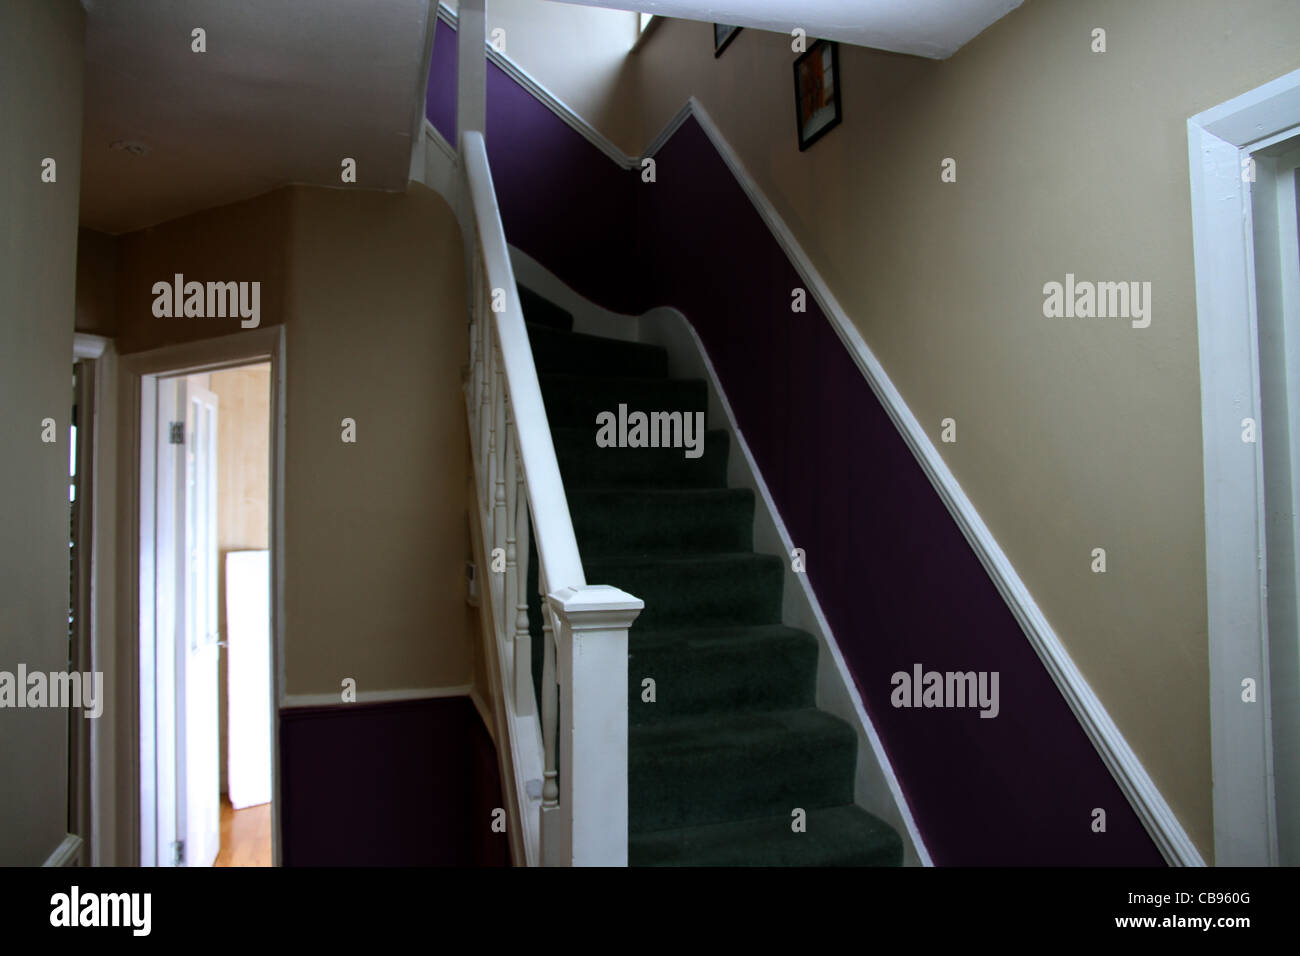 Stairs, Stair way, Green Carpet, Purple Wall, Doors and pictures on the wall. Stock Photo